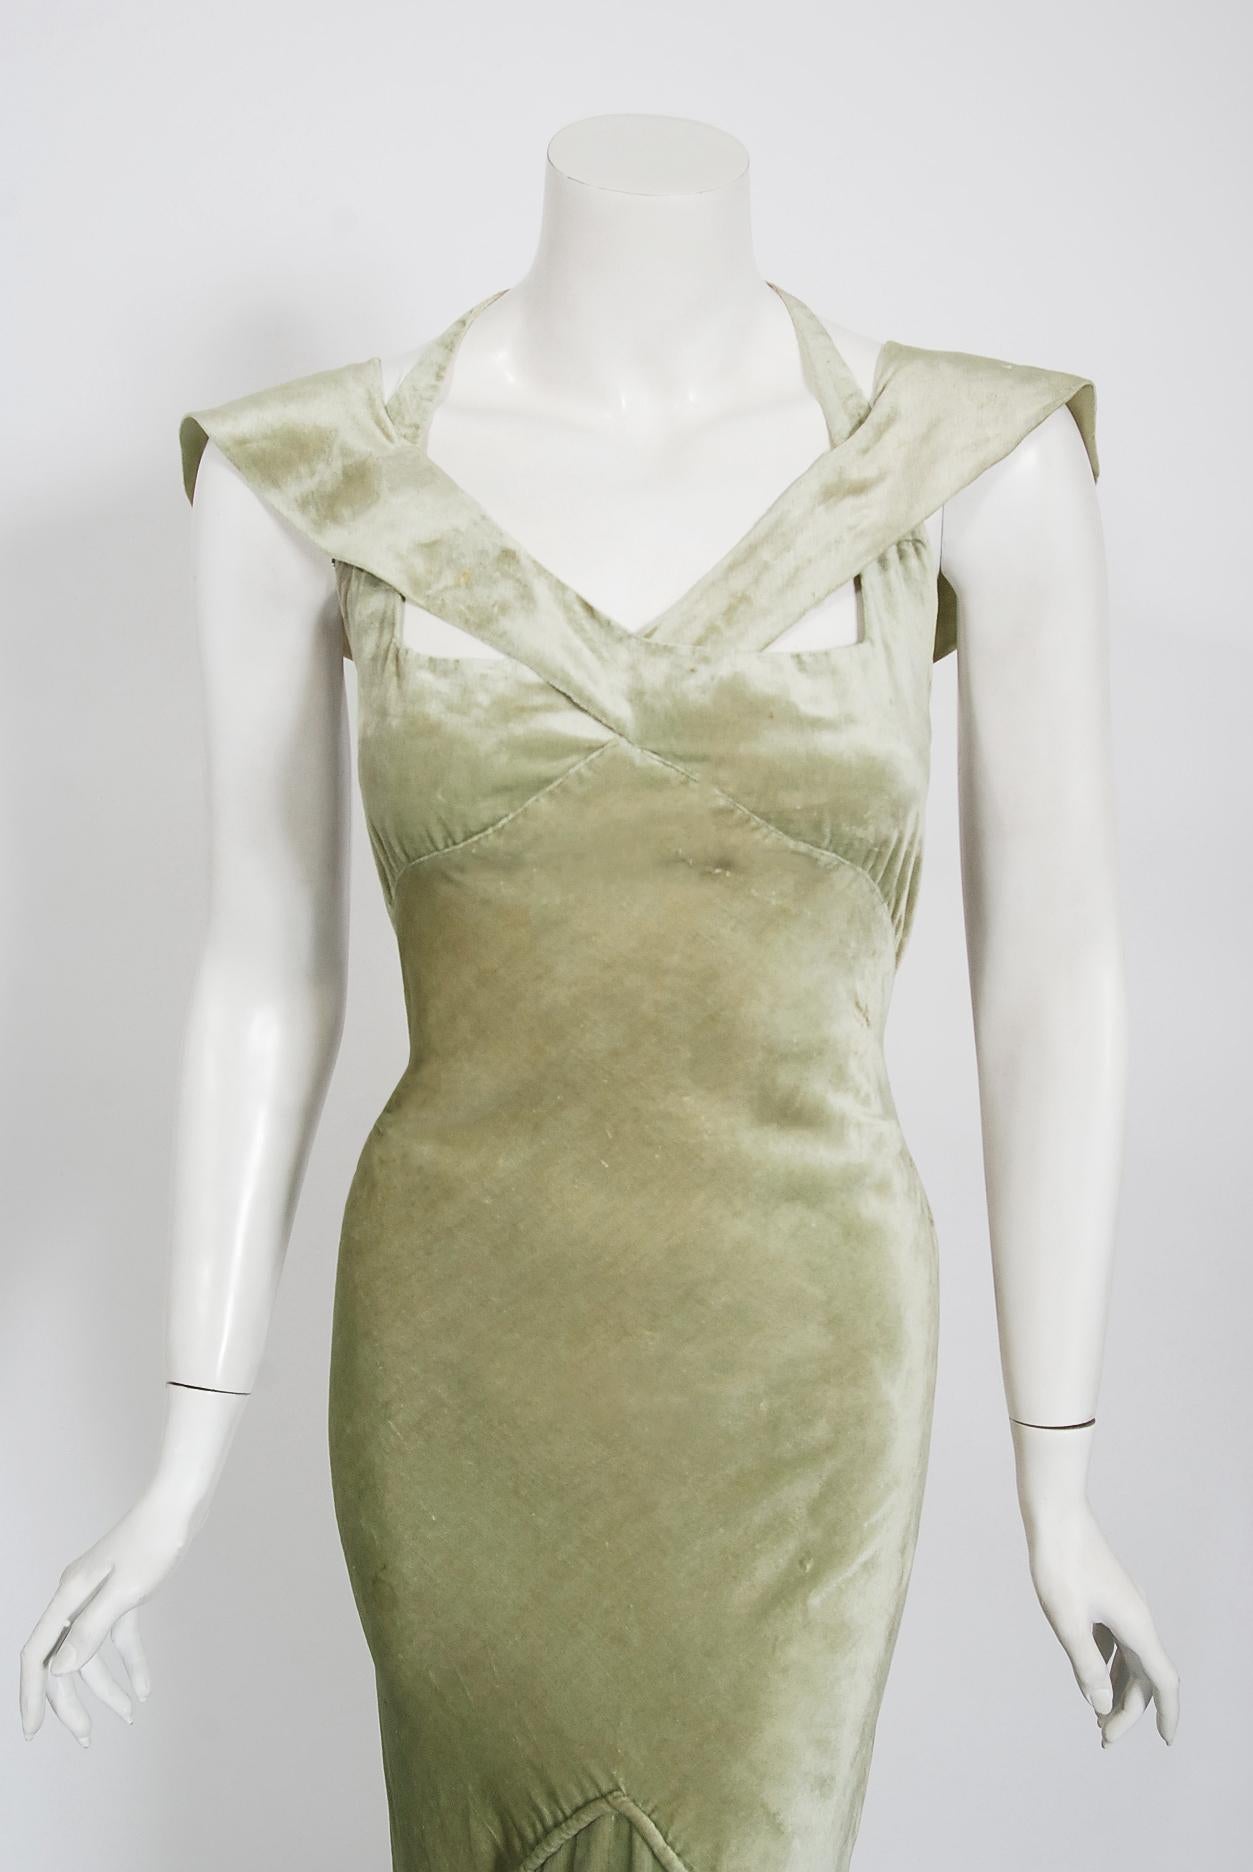 Breathtaking 1930's silk-velvet gown by the incredibly rare Jane Régny house. Jane Régny was the pseudonym of the French fashion designer Madame Balouzet Tillard de Tigny. She and her husband launched the high-end couture company, which was active